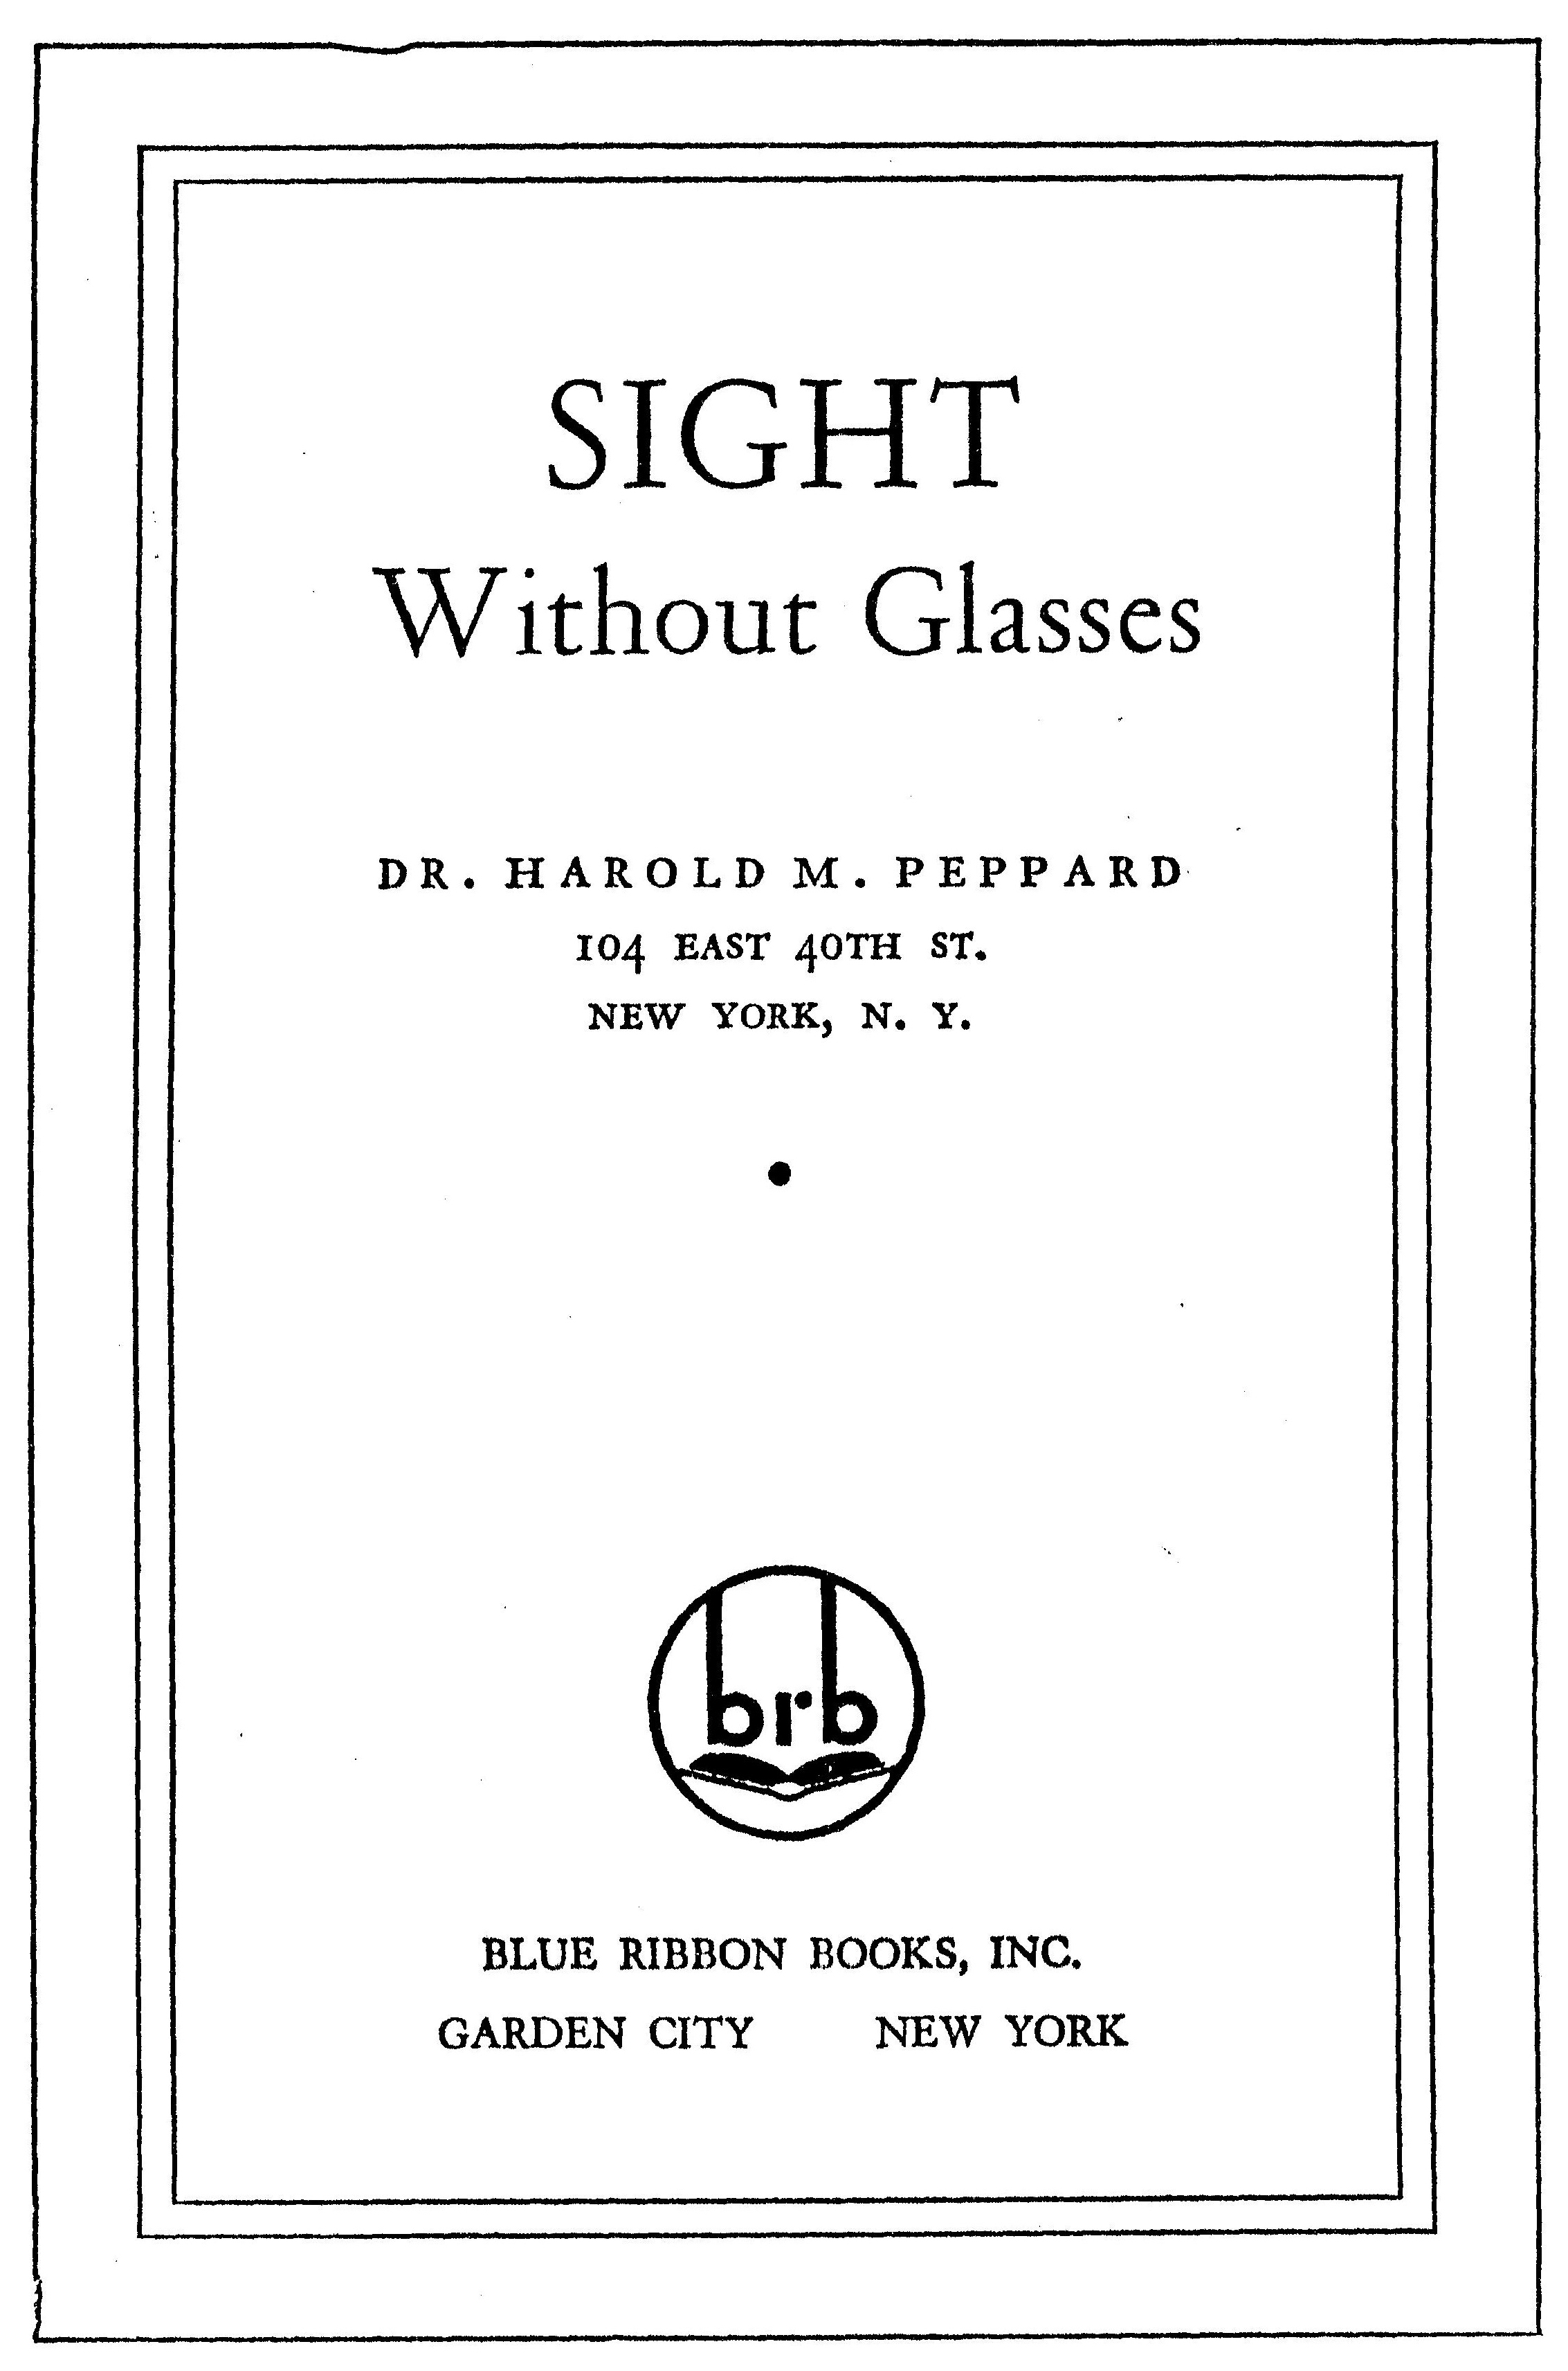 Harold Peppard's book; Sight Without Glasses. Optometrist Trained by Dr. Bates